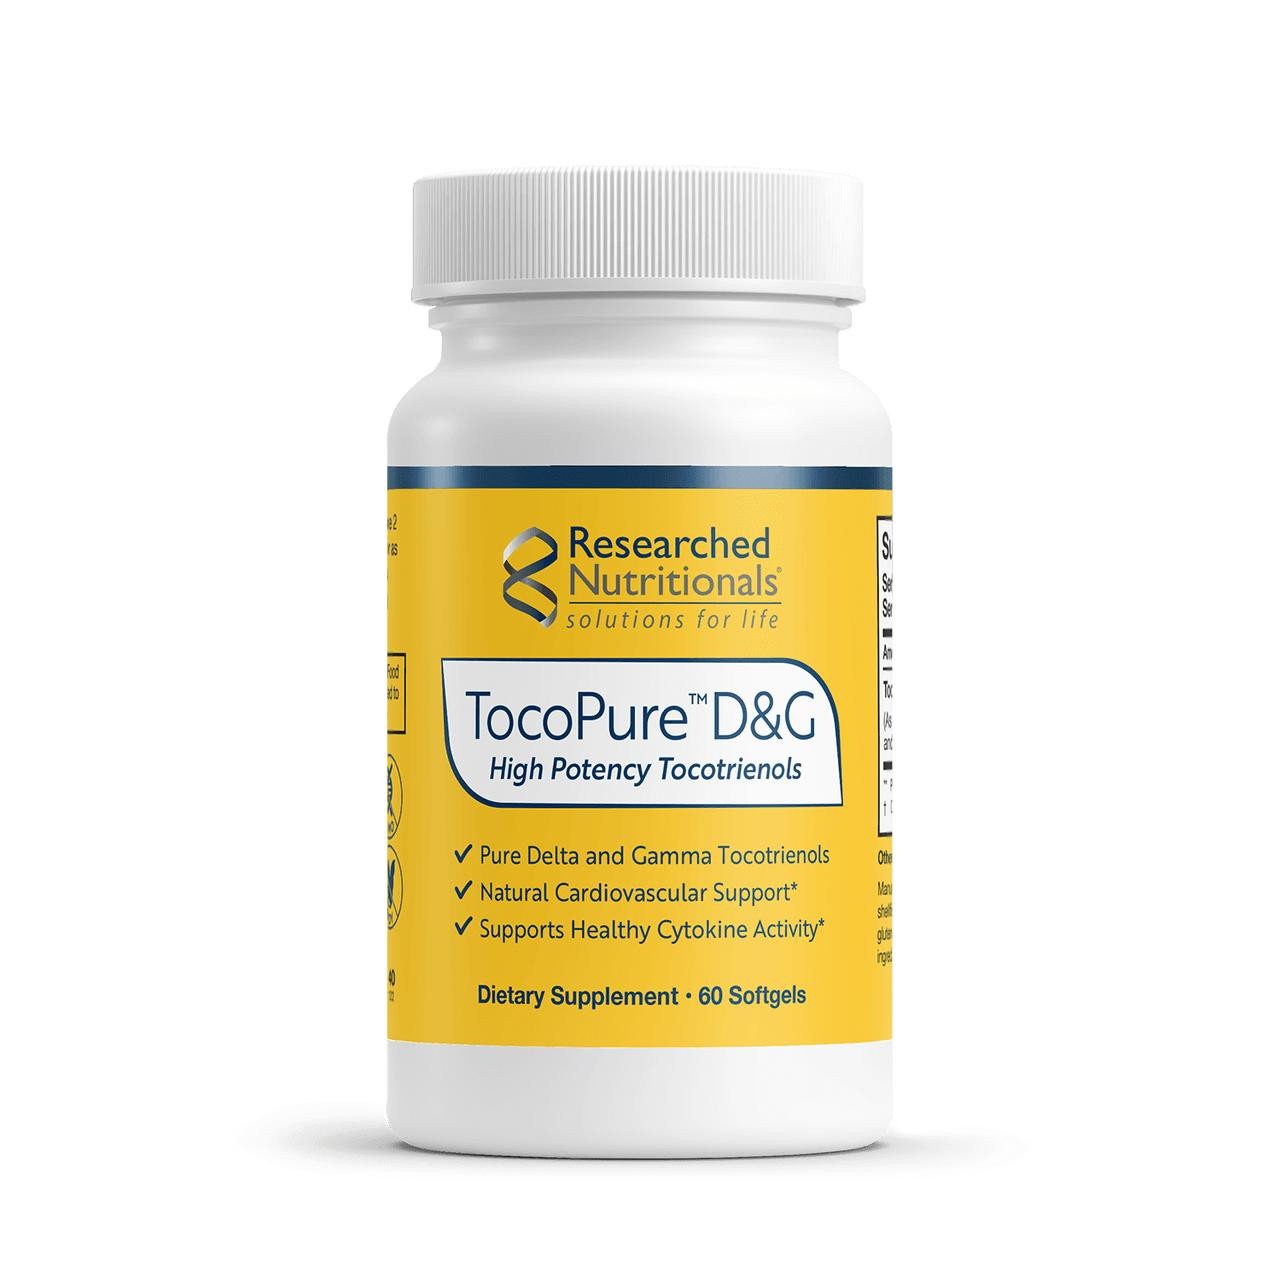 Researched Nutritionals TocoPure D&G High Potency Tocotrienols 60 softgels 